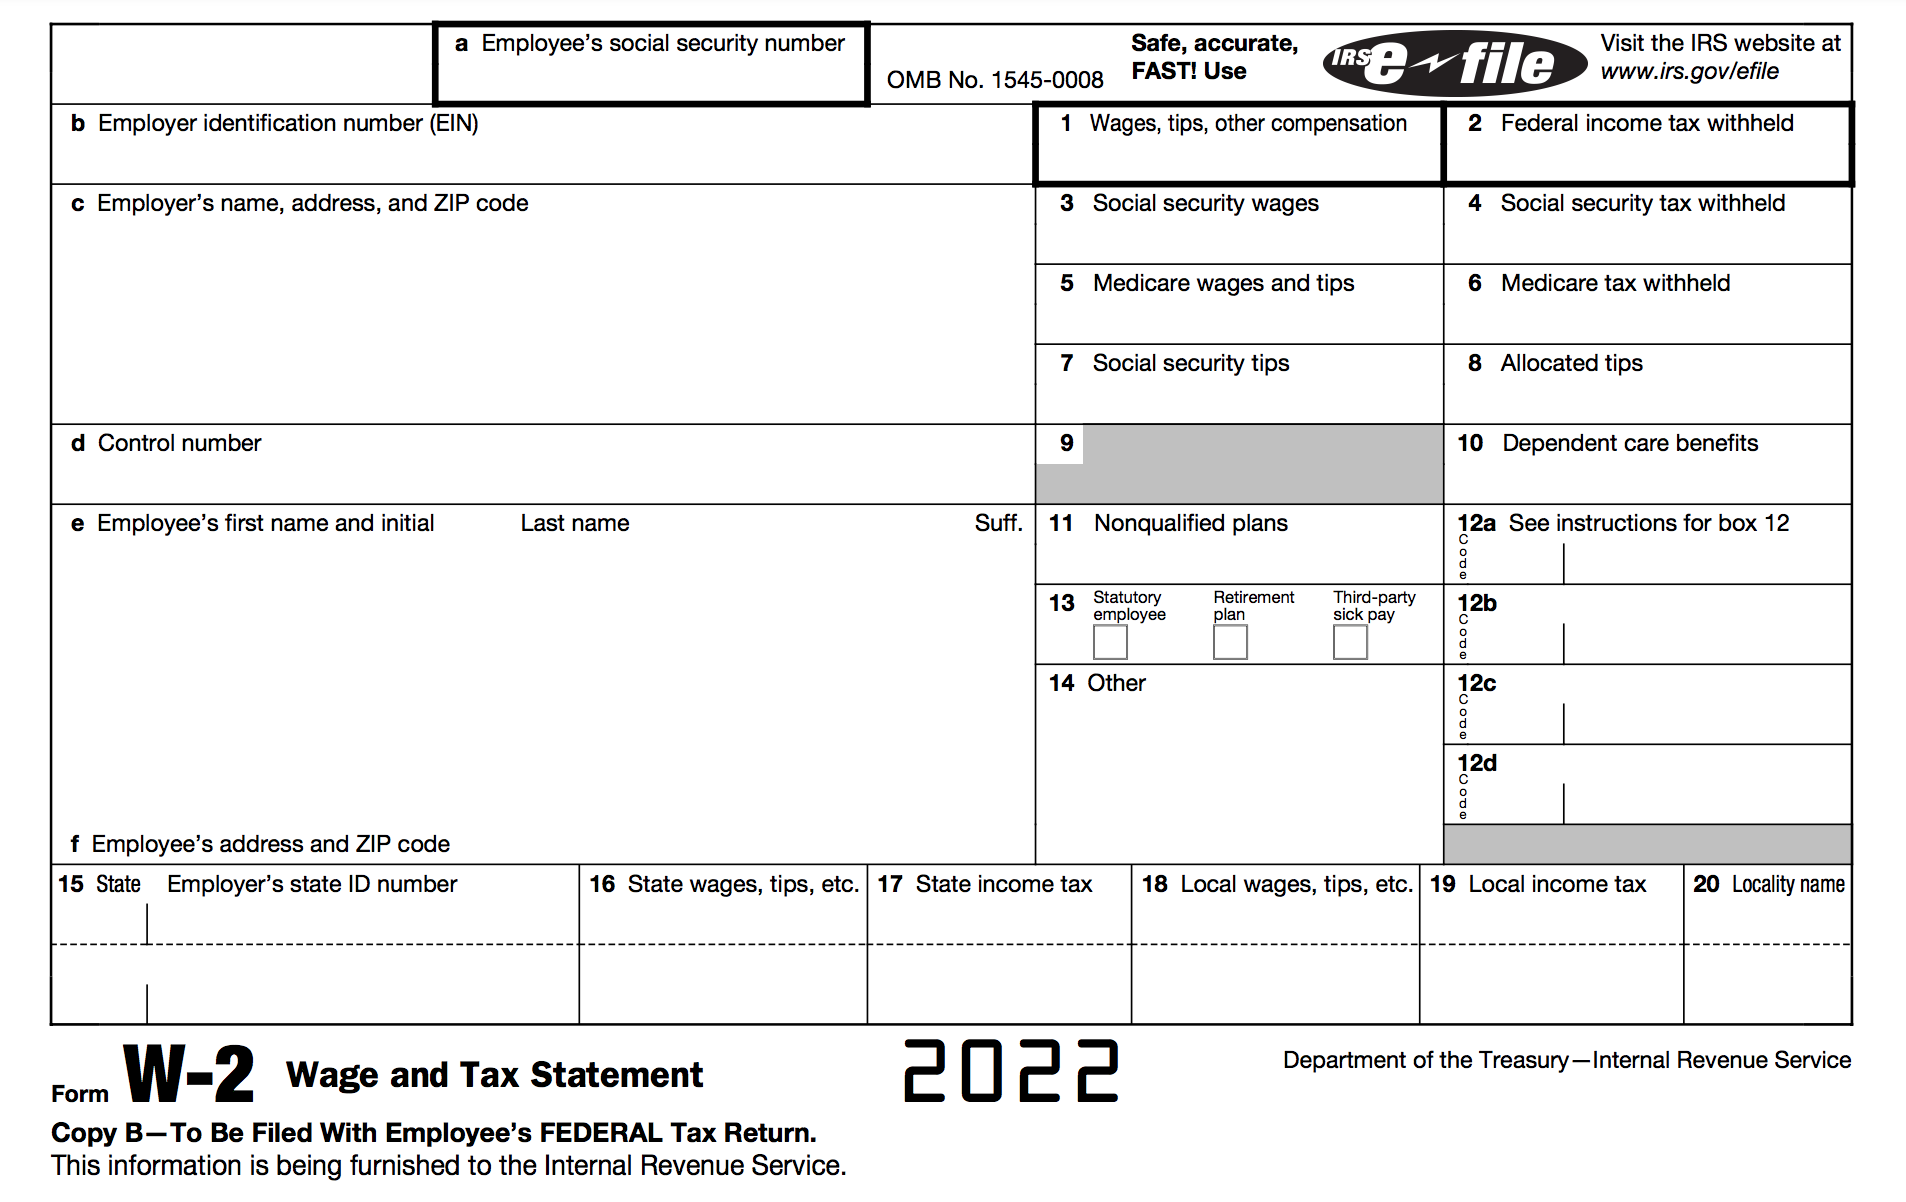 How To Fill Out A W-2 Tax Form | Smartasset intended for State Of Illinois W2 Form